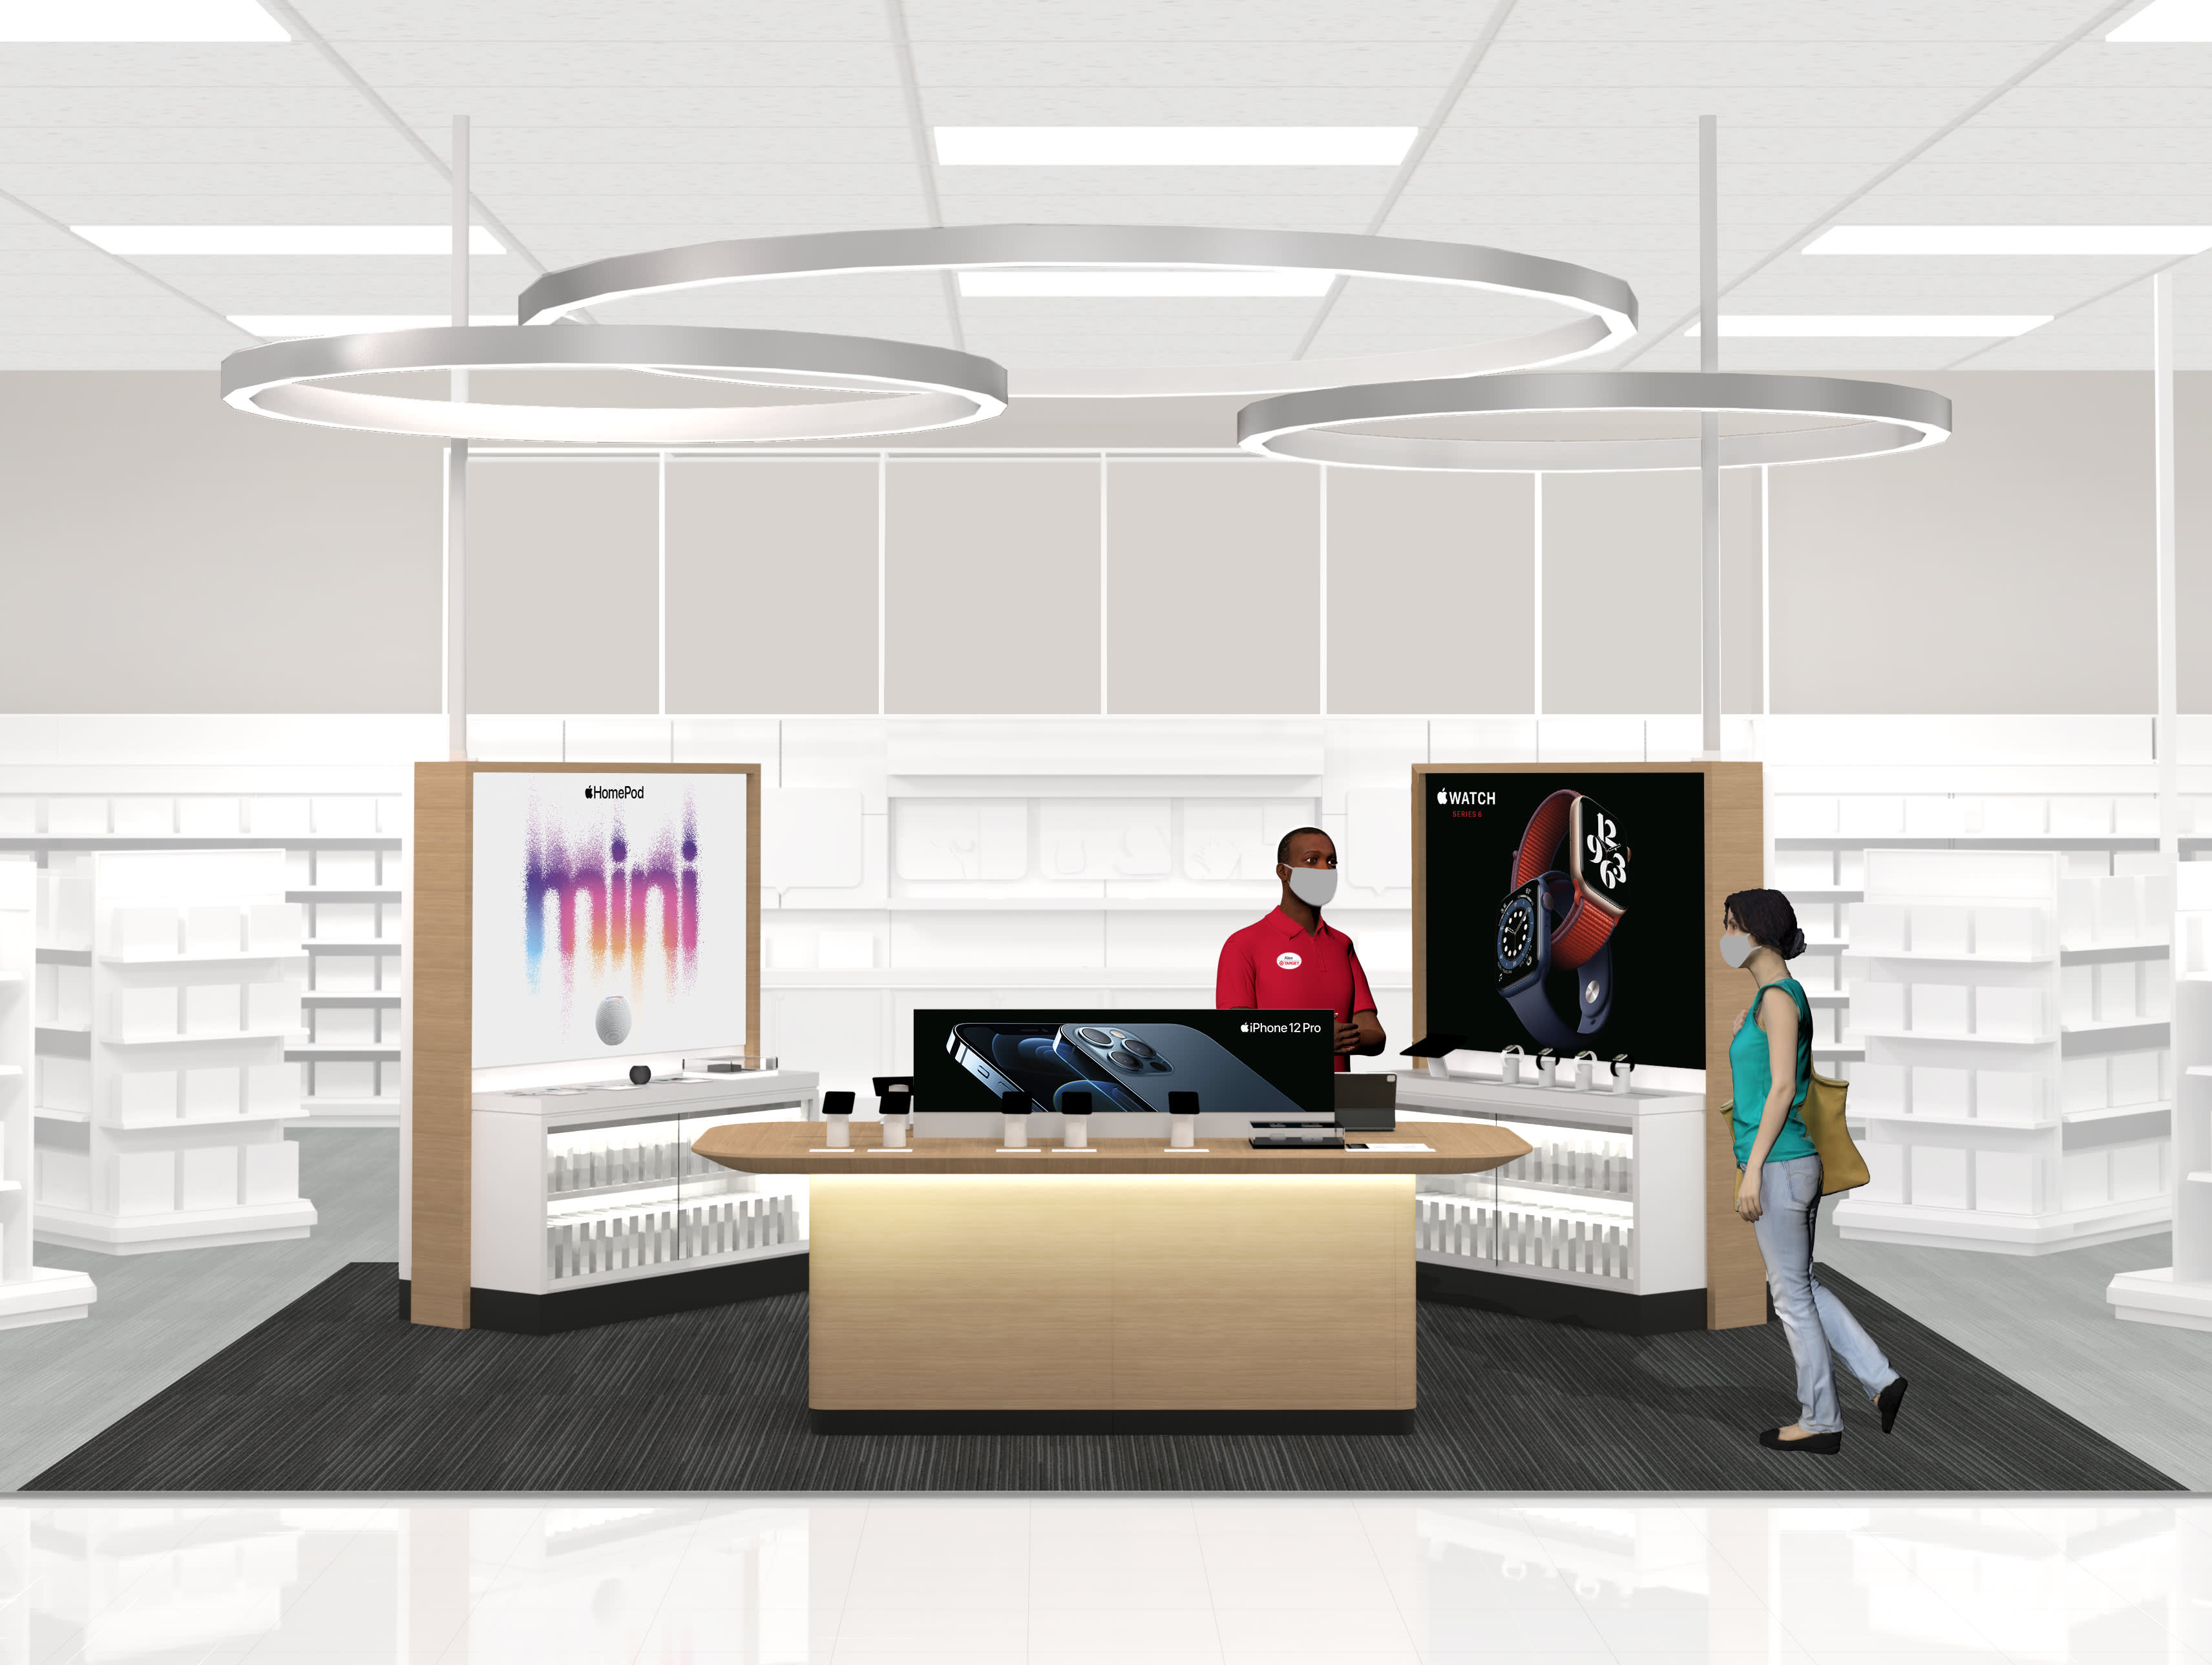 Apple store within Target
